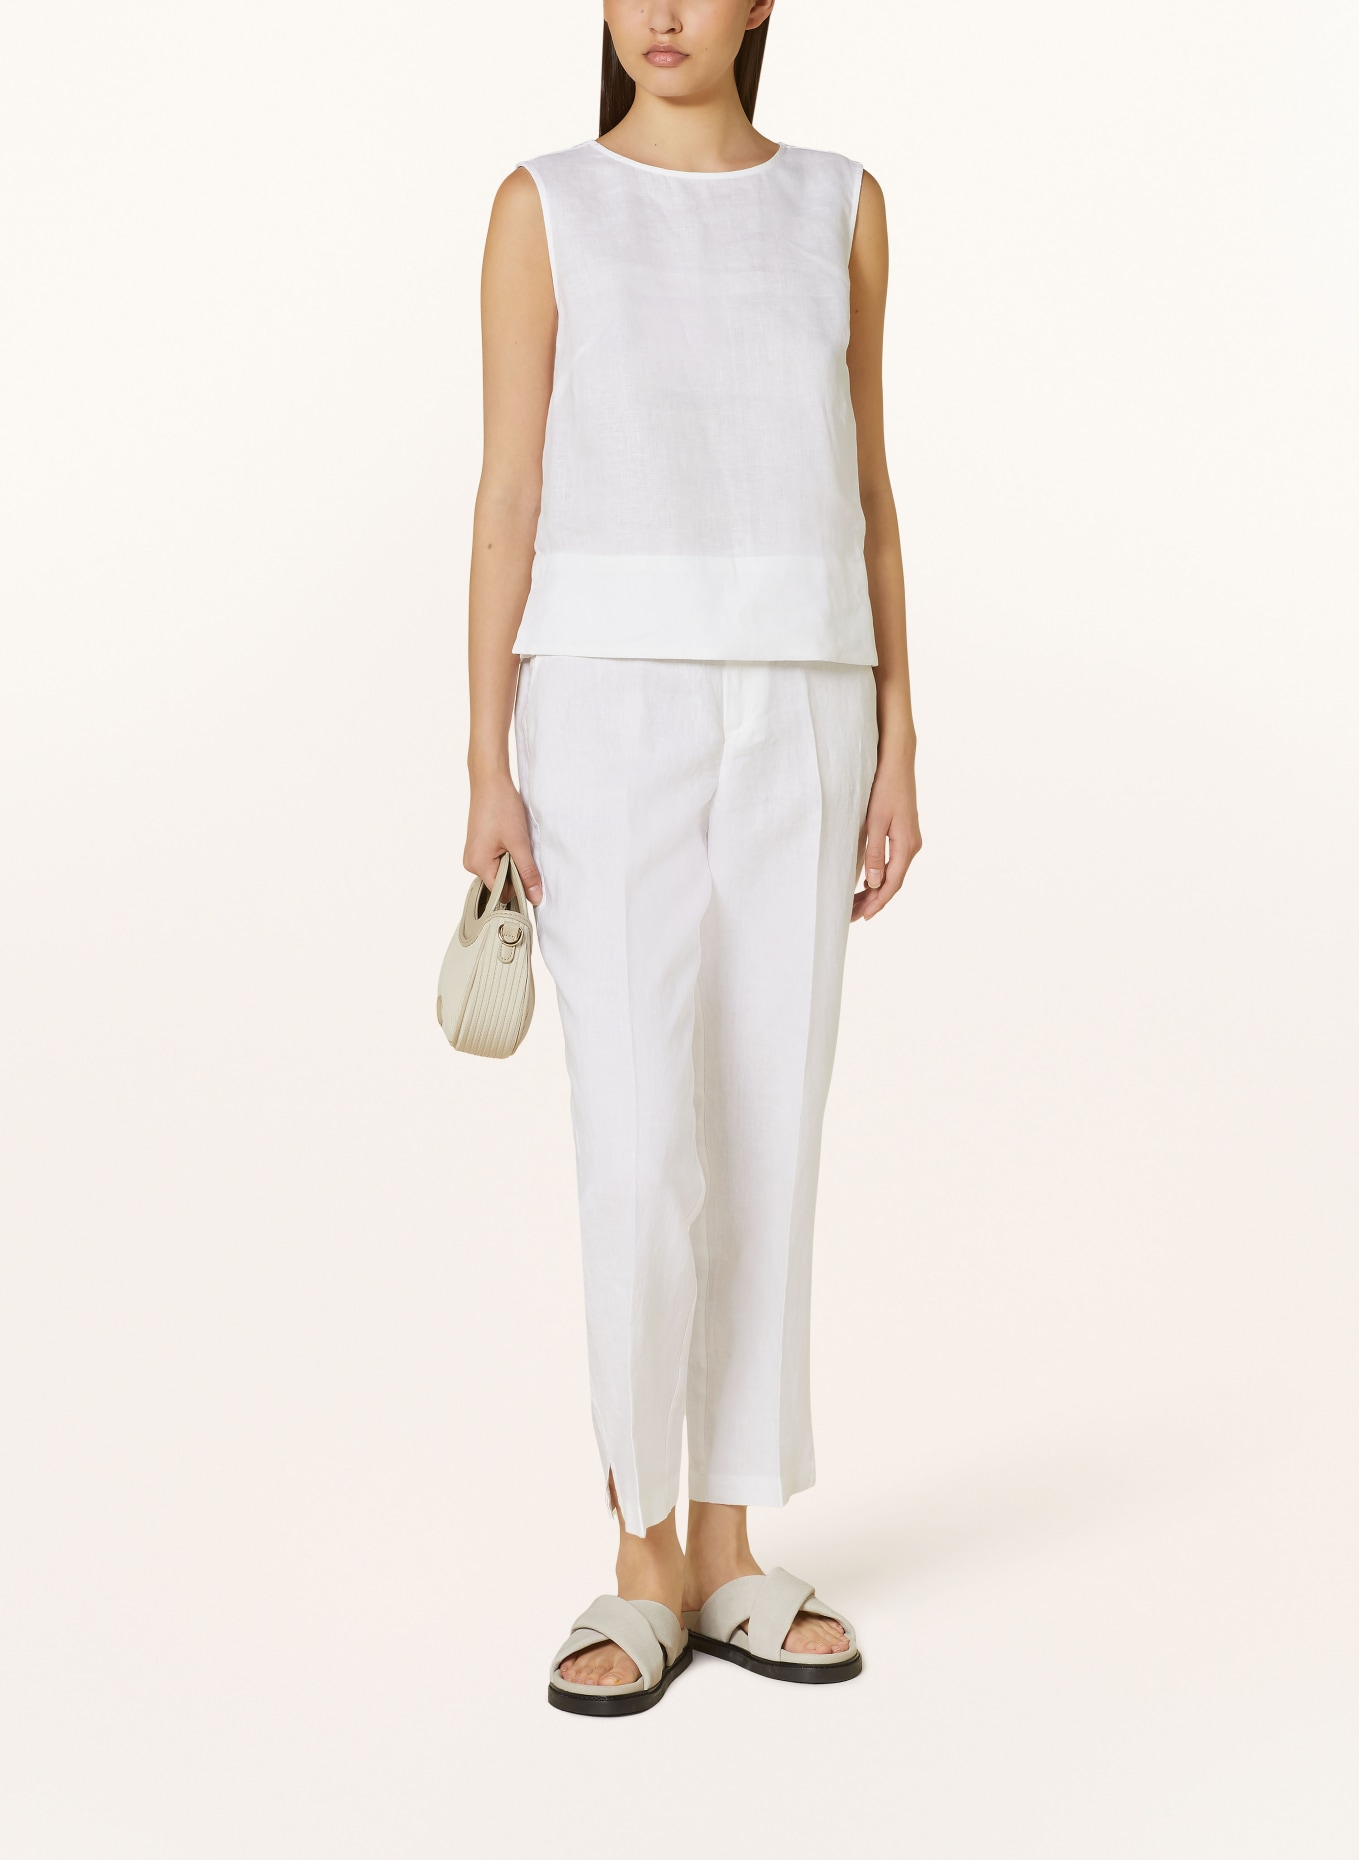 HOBBS Blouse top MALINDI in linen, Color: WHITE (Image 2)